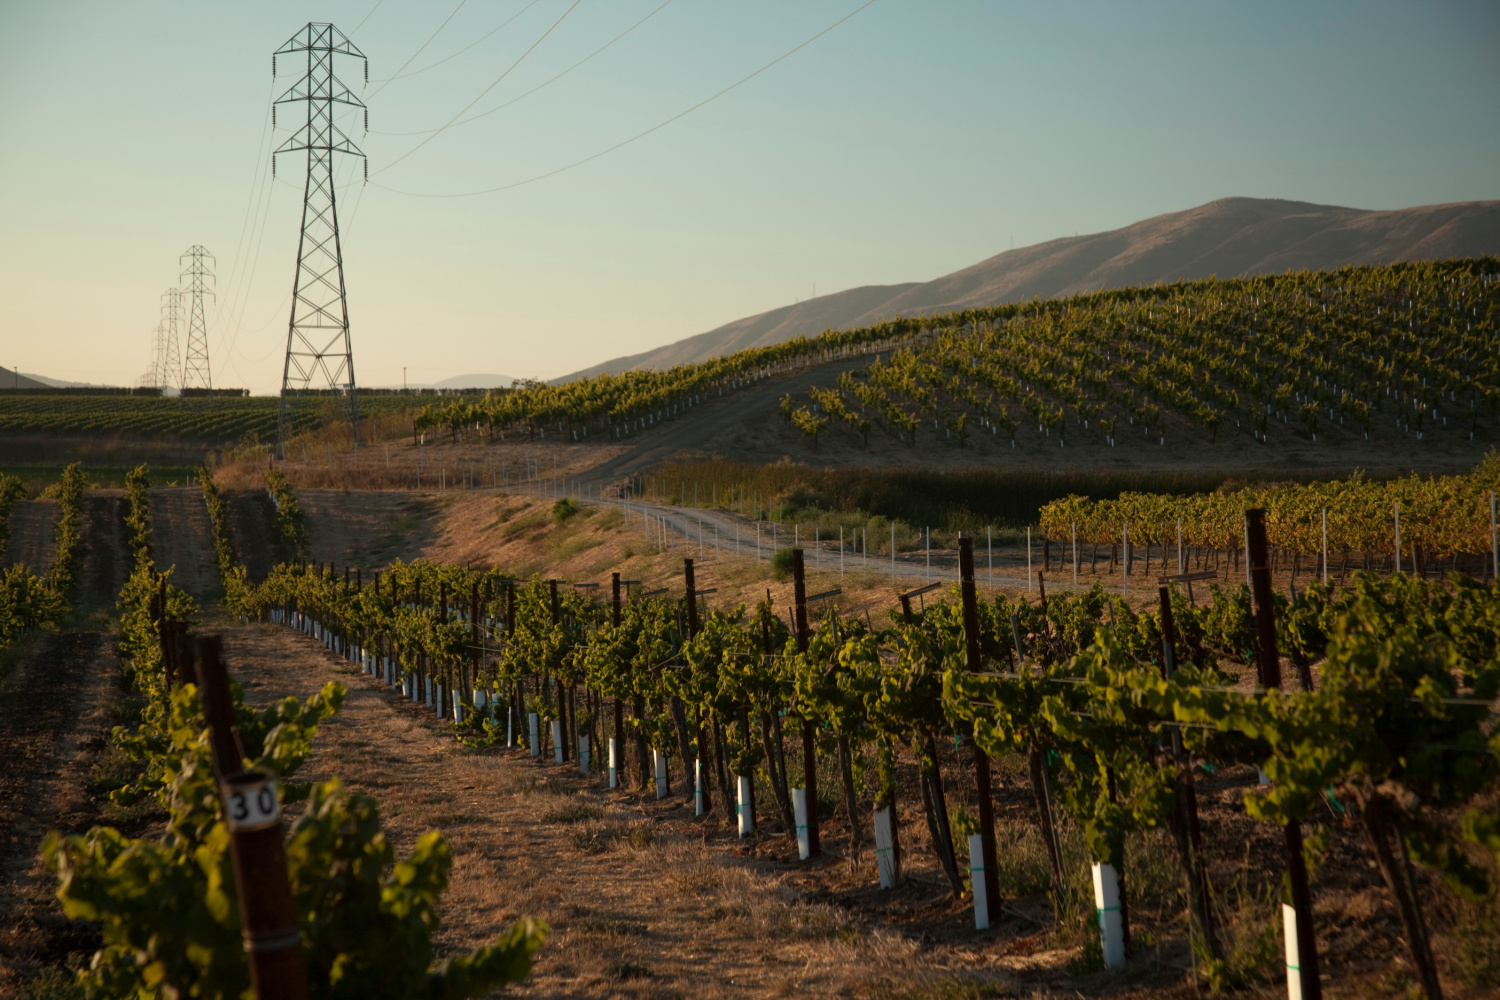 Powerlines stand over a California vineyard, a potential danger to the business and residents.